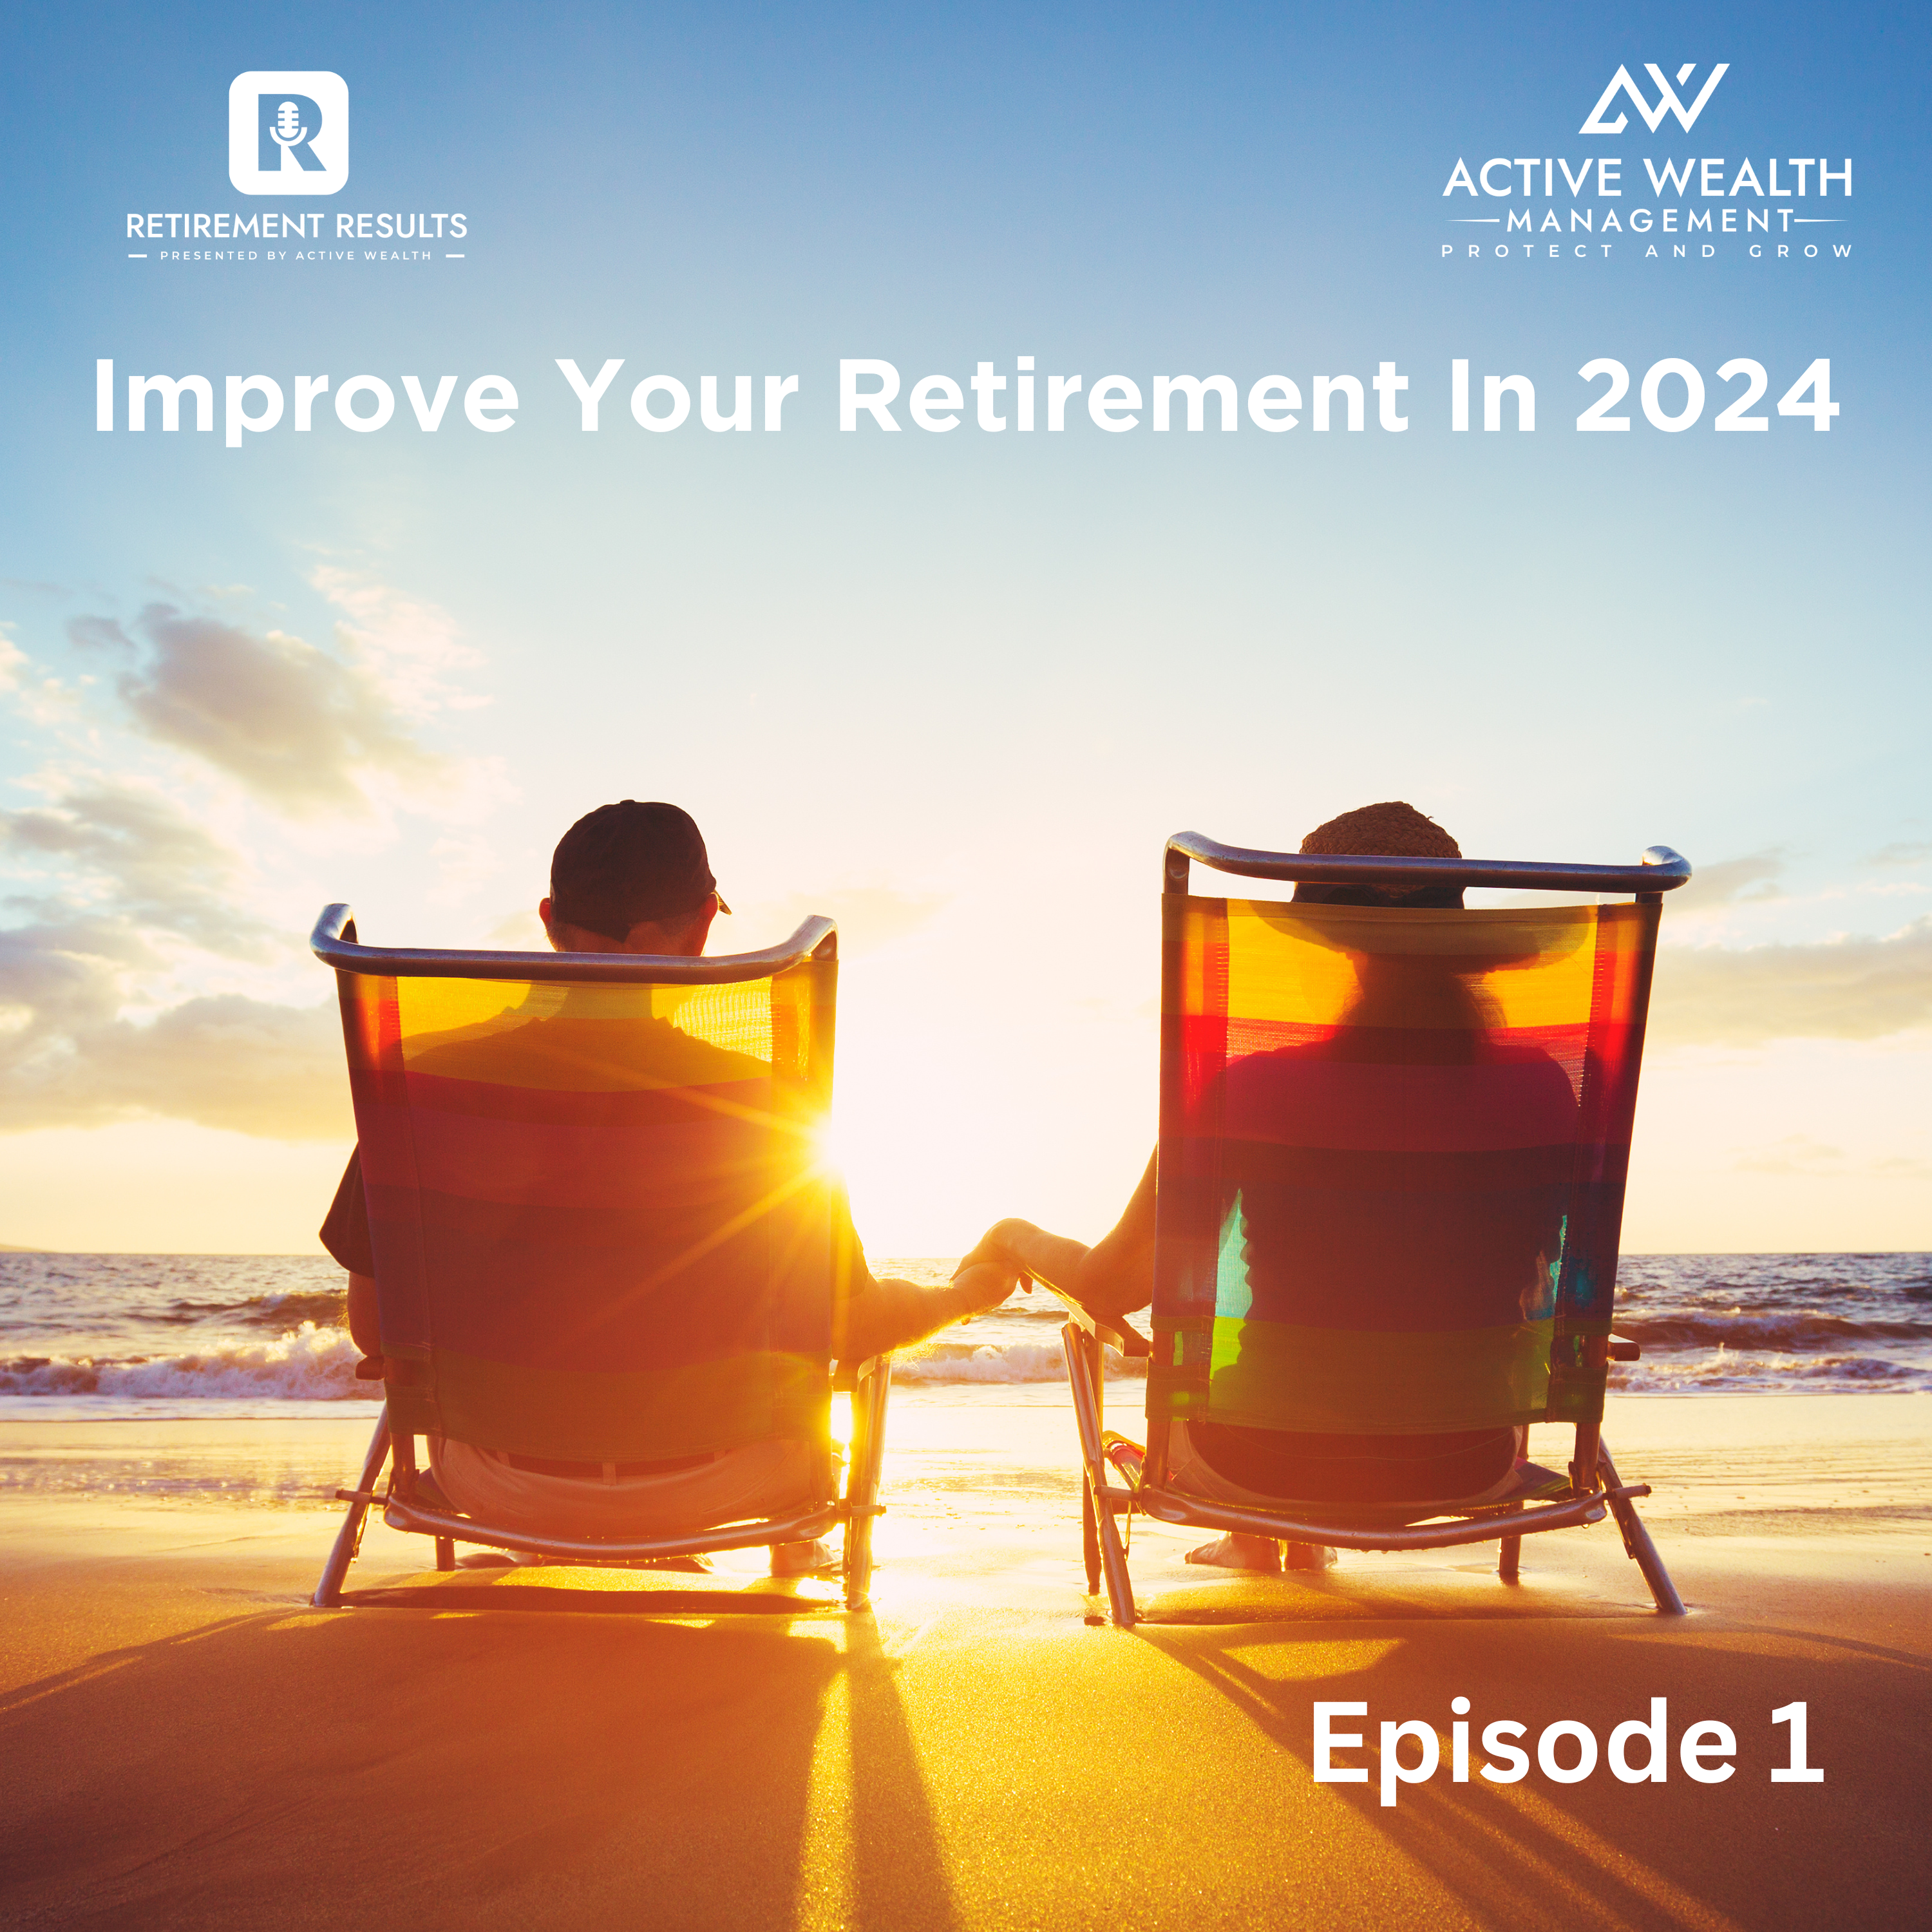 How Americans Can Improve Their Retirement Plans in 2024